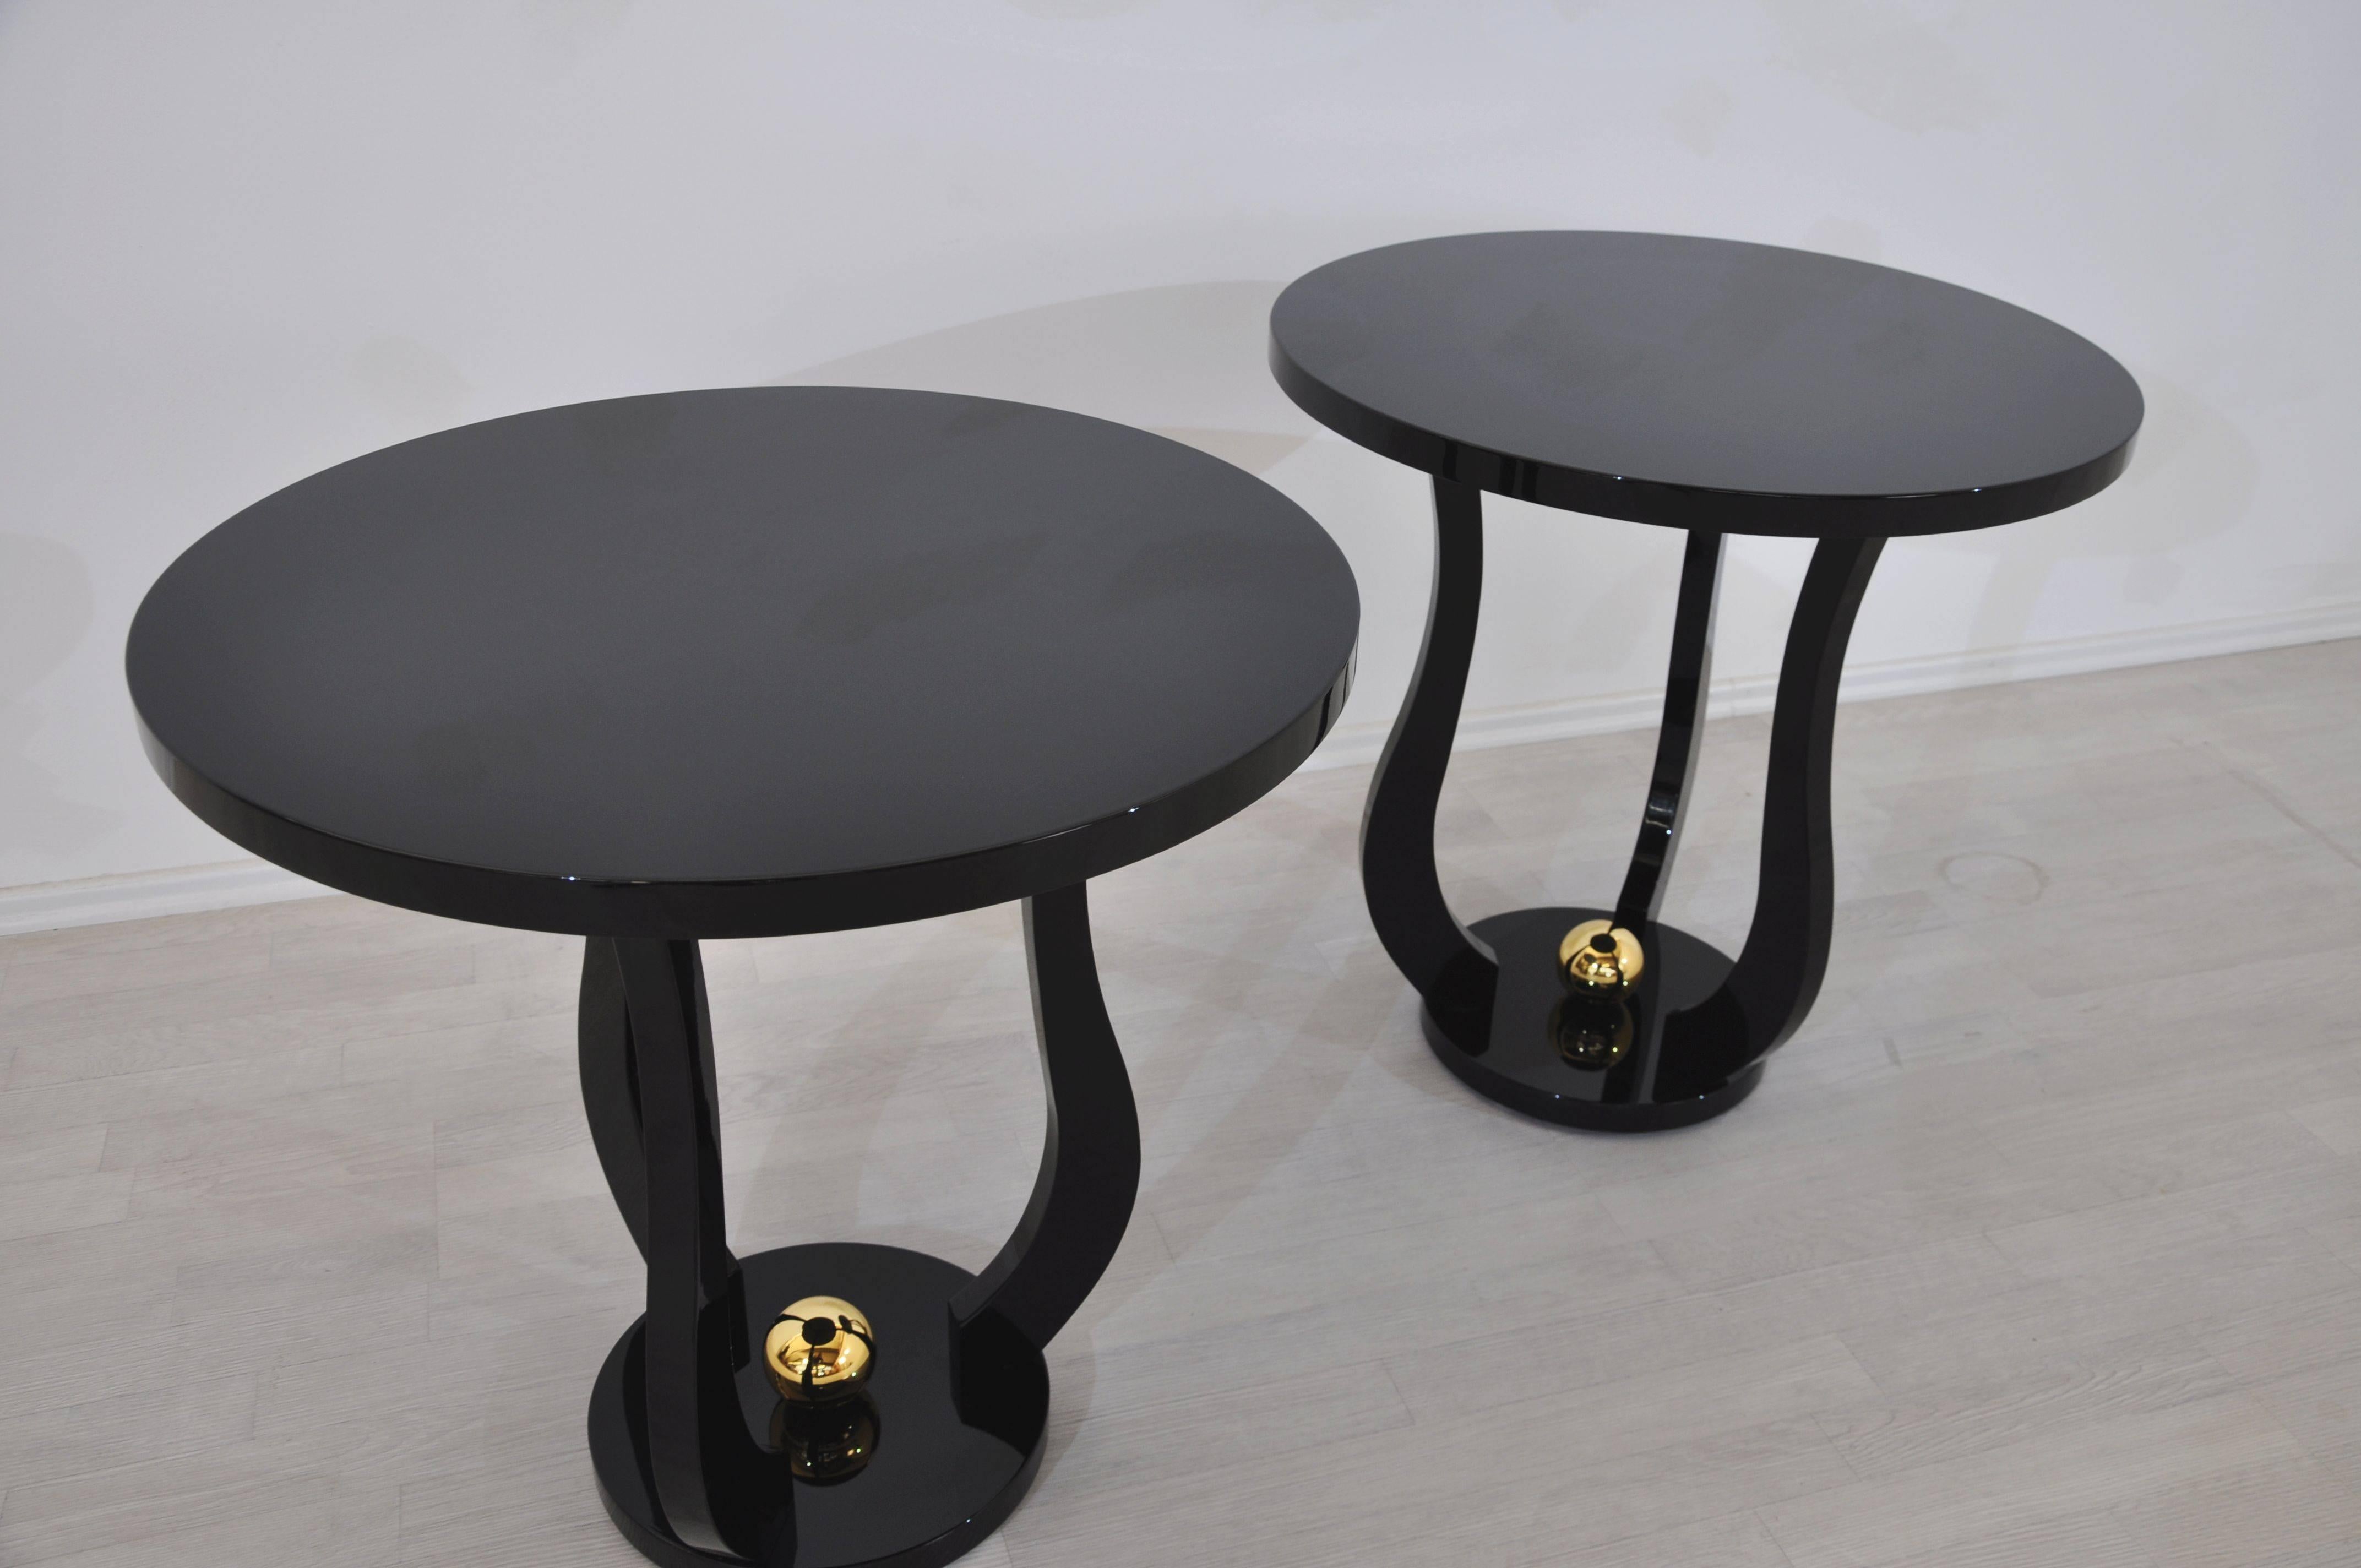 This pair of side tables with a beautiful shape are reminiscent of the great Art Deco body language.  It offers a simple high gloss black paintjob combined with a central golden ball for an eye-catching experience.

- Wonderful curved legs
- high